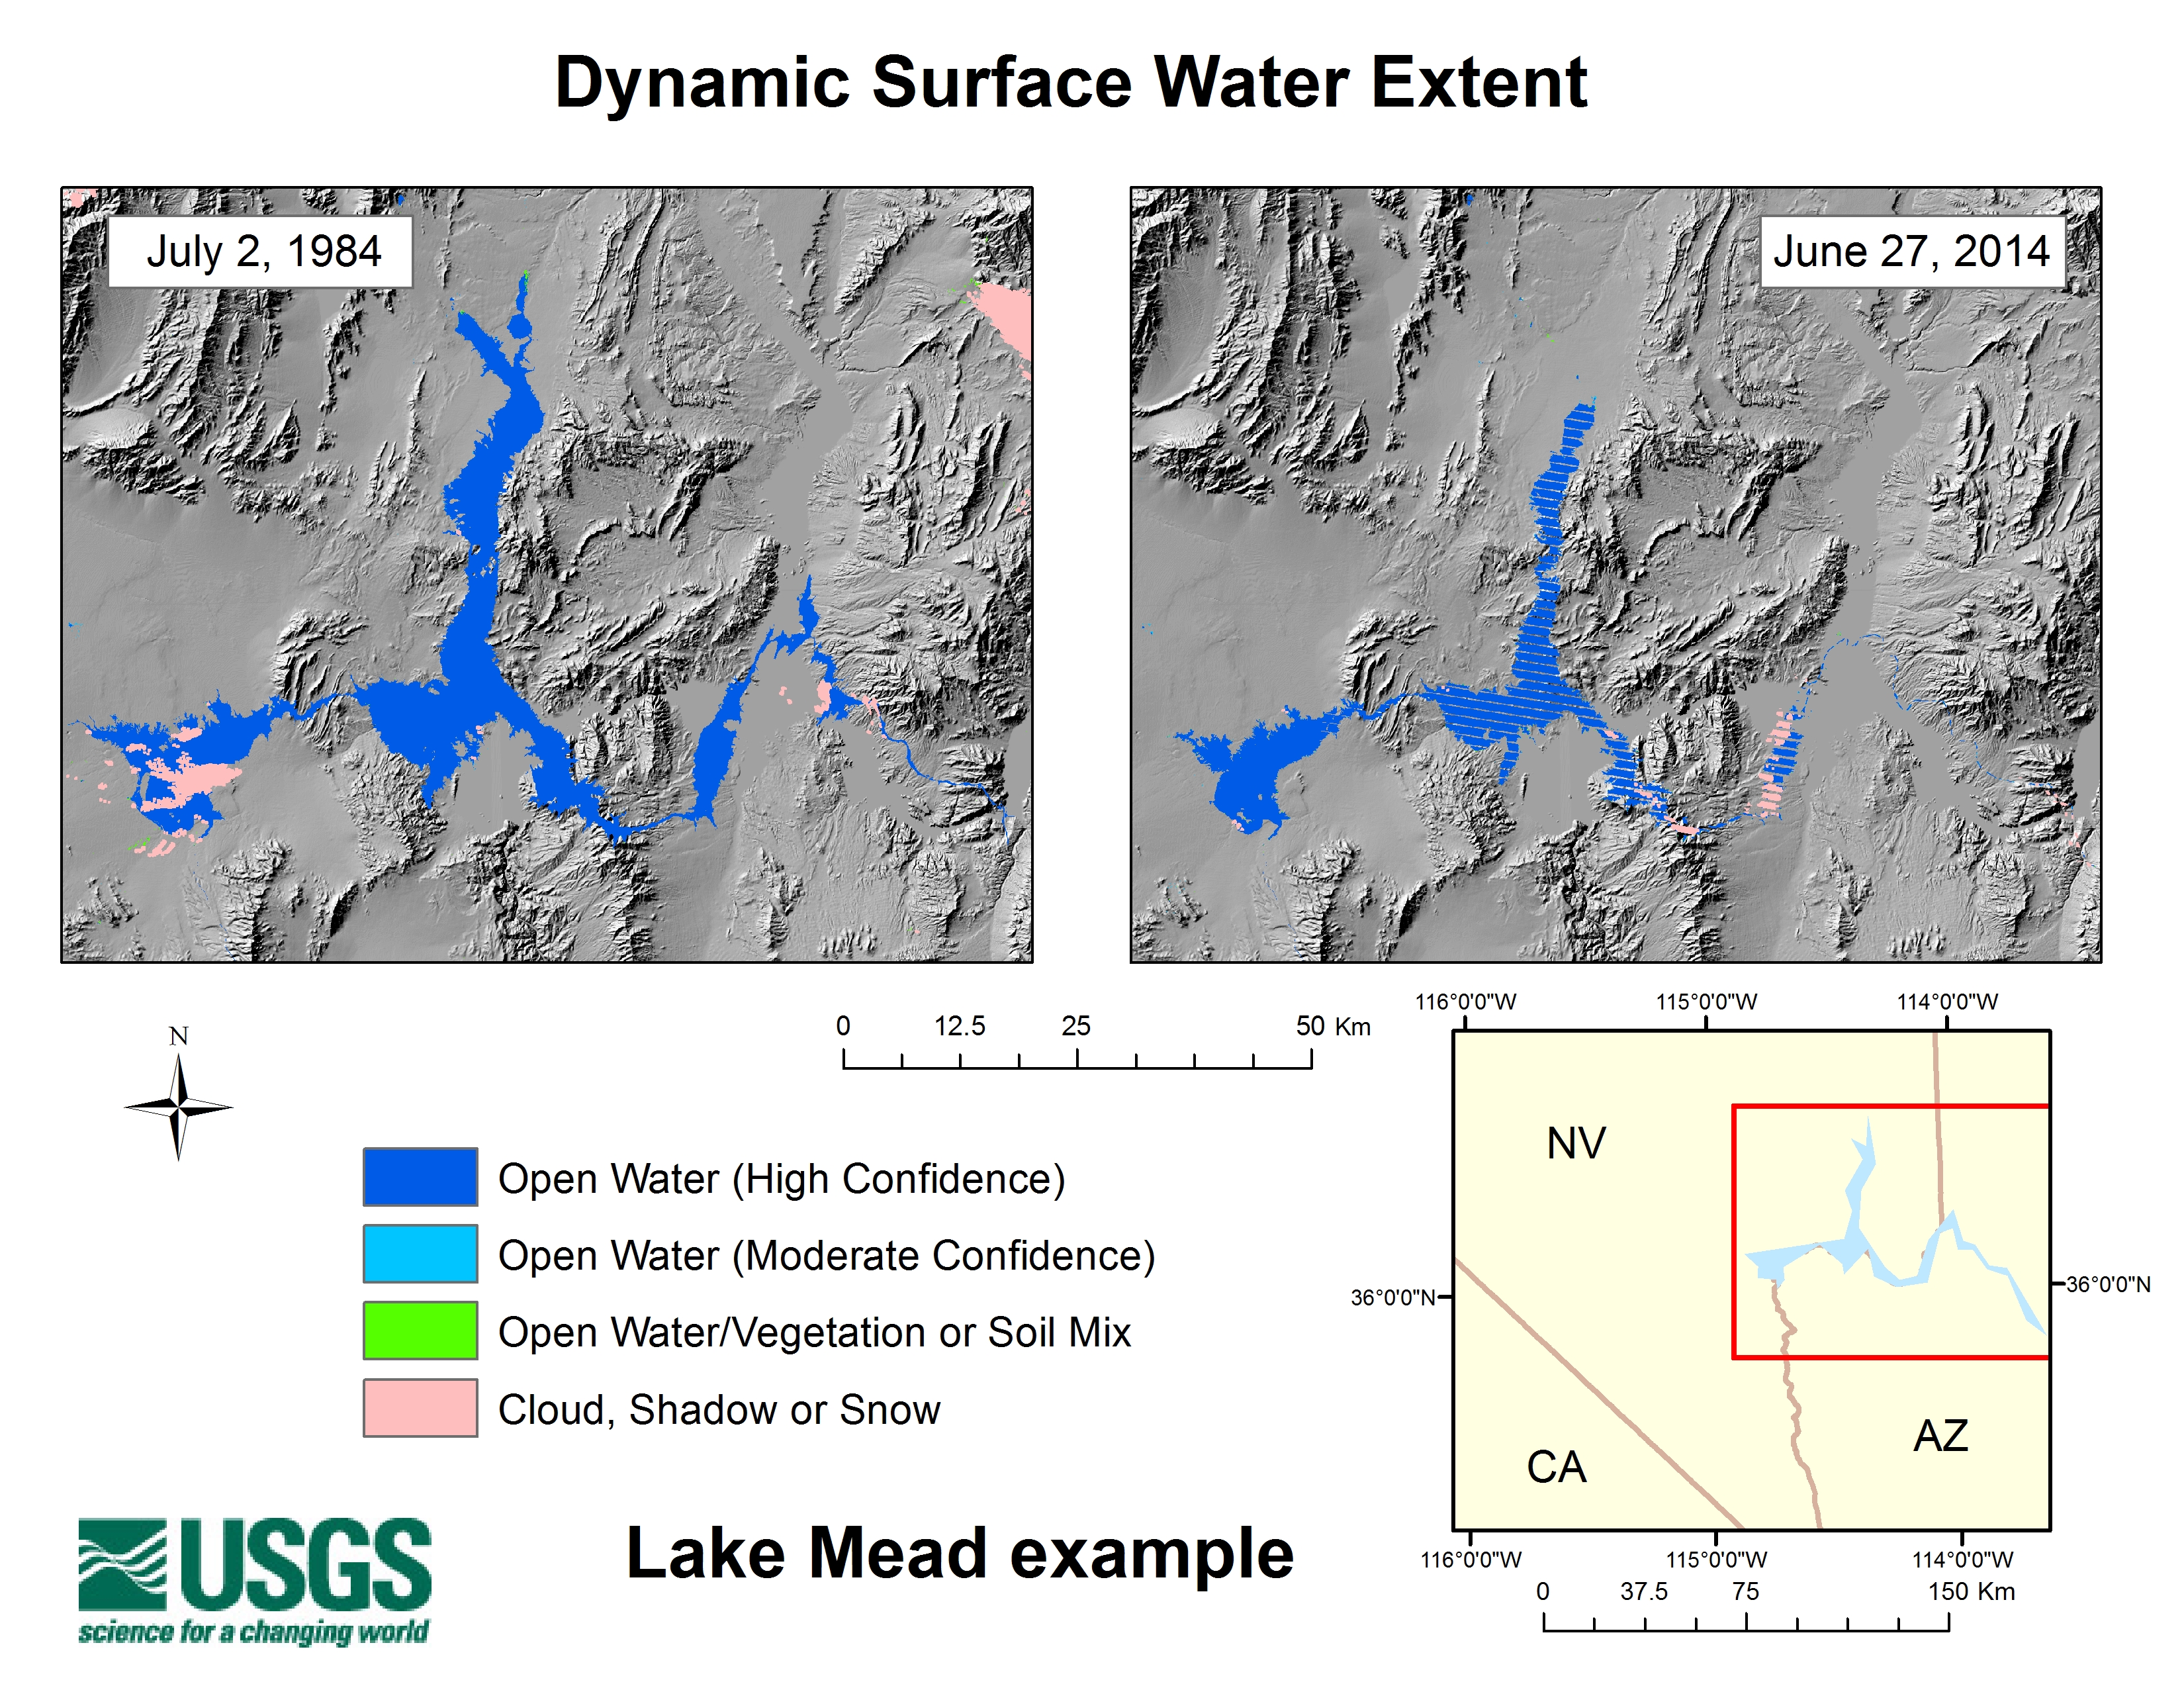 Lake Mead Dynamic Surface Water Extent data derived from Landsat 5 (Left) and Landsat 7 (right) summer images captured nearly 30 years apart. Significant differences in Lake Mead aerial extent caused by variations in climate and water demand are obvious. Such lengthy records of surface water variations are useful for science, resource management, and education. Note: Cross hatches visible in the right image are missing data due to The Landsat 7 scan line corrector failure.